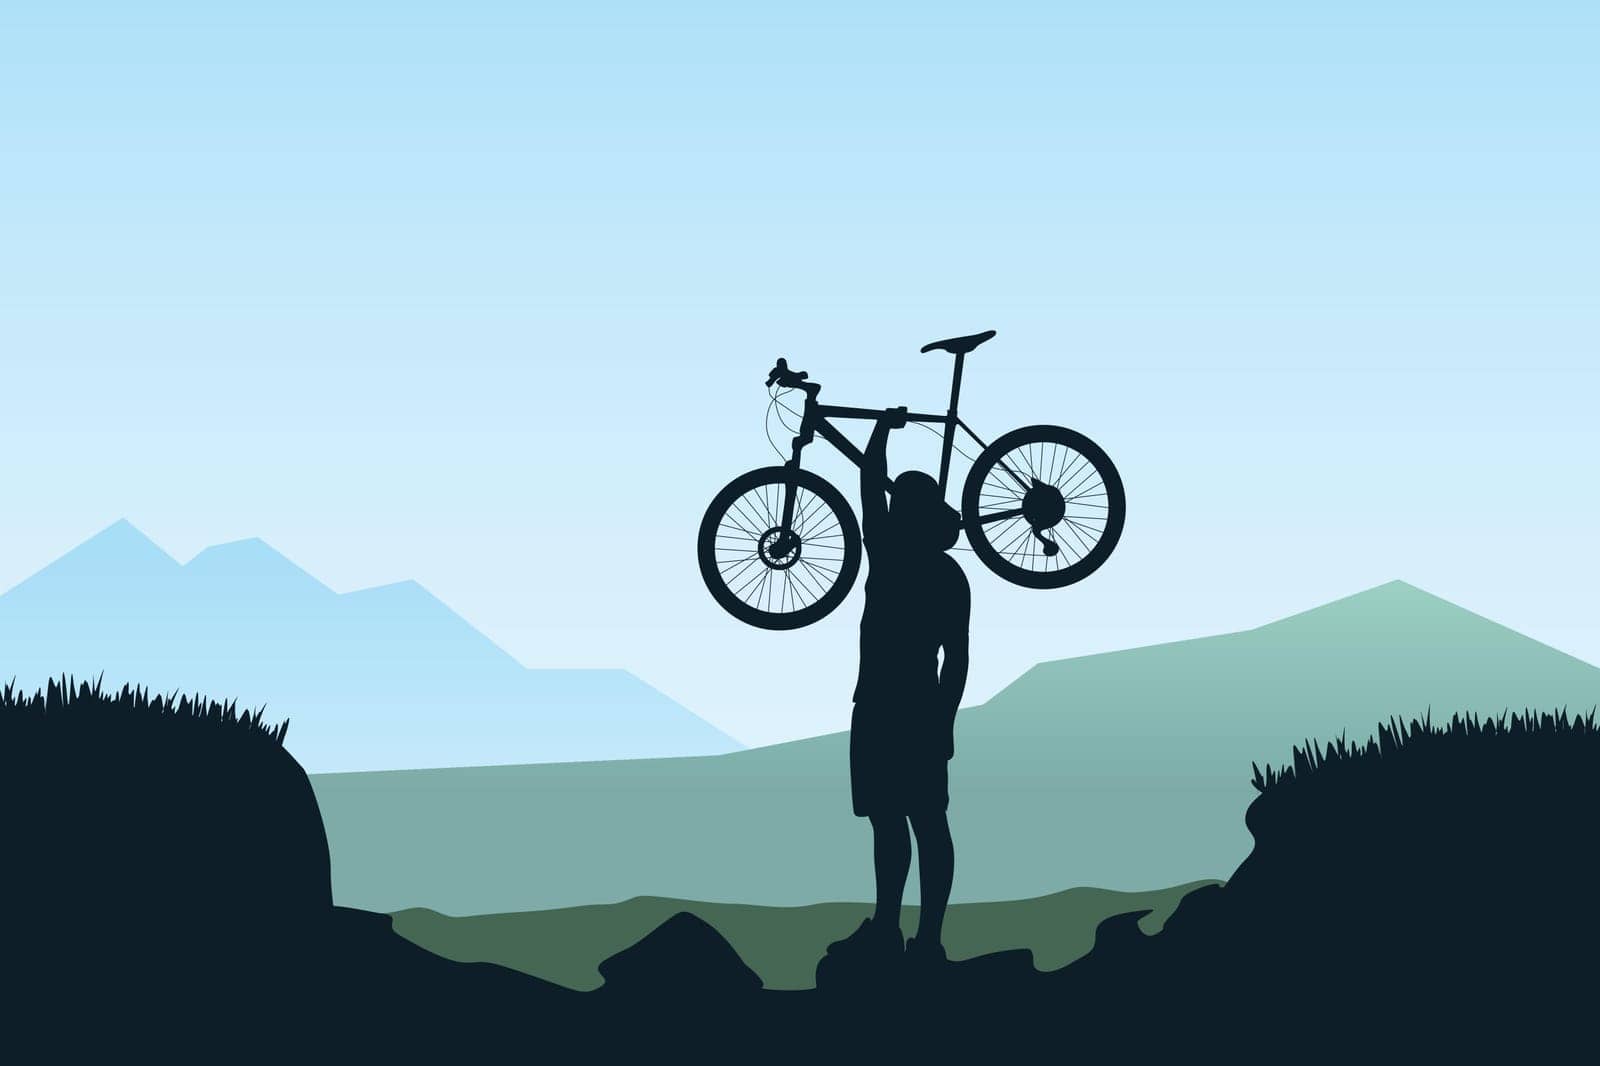 illustration of bicycle rider silhouette carrying bicycle across pit